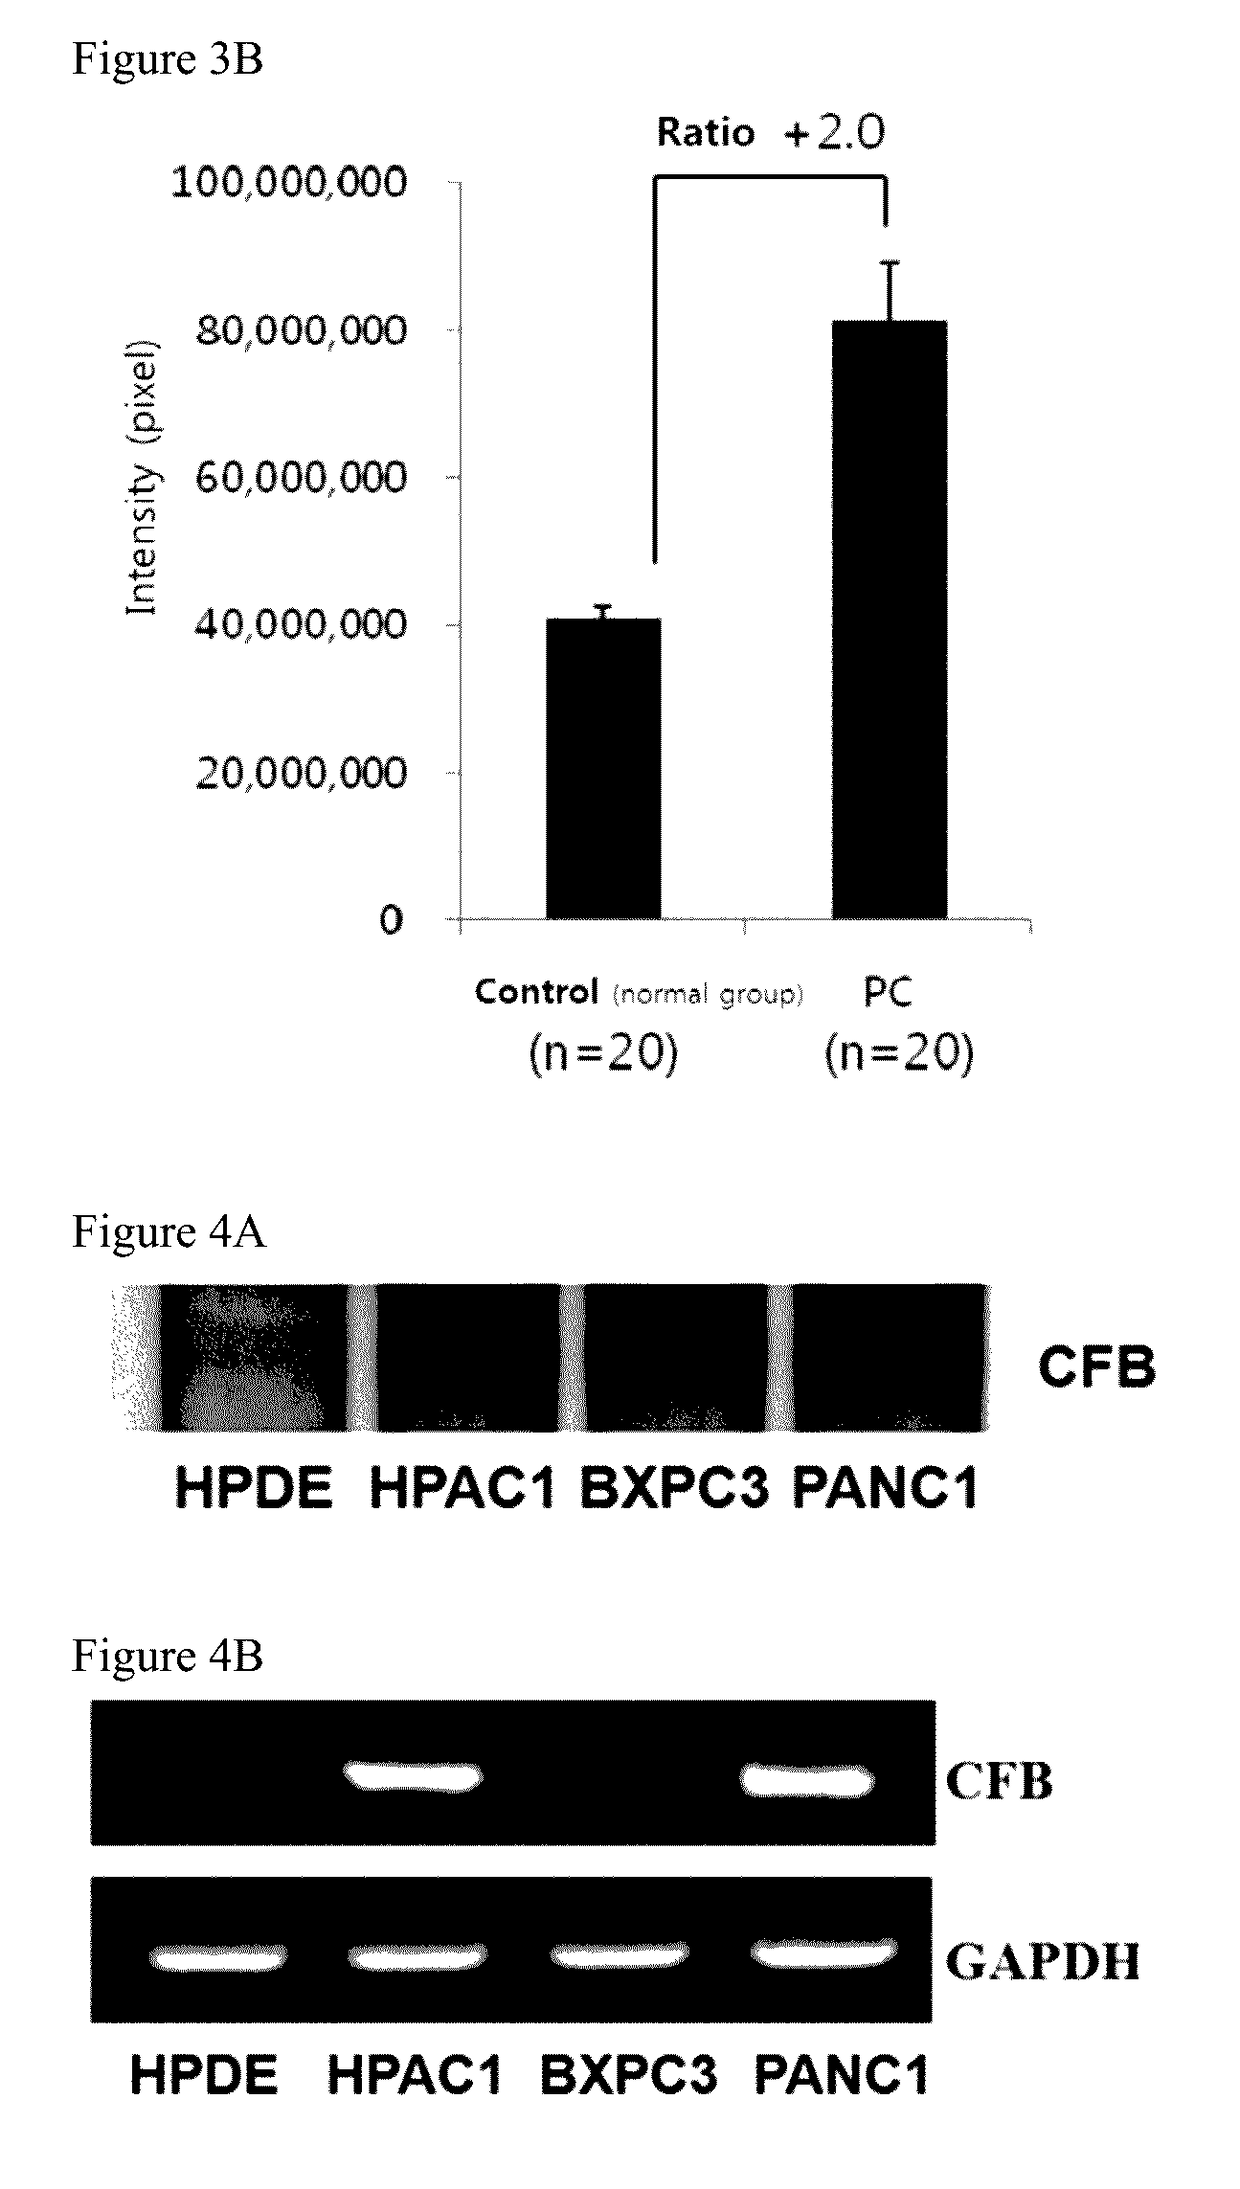 Kit comprising antibody specifically binding to complement factor b protein and antibody specifically binding to carbohydrate antigen 19-9 protein for diagnosing pancreatic cancer